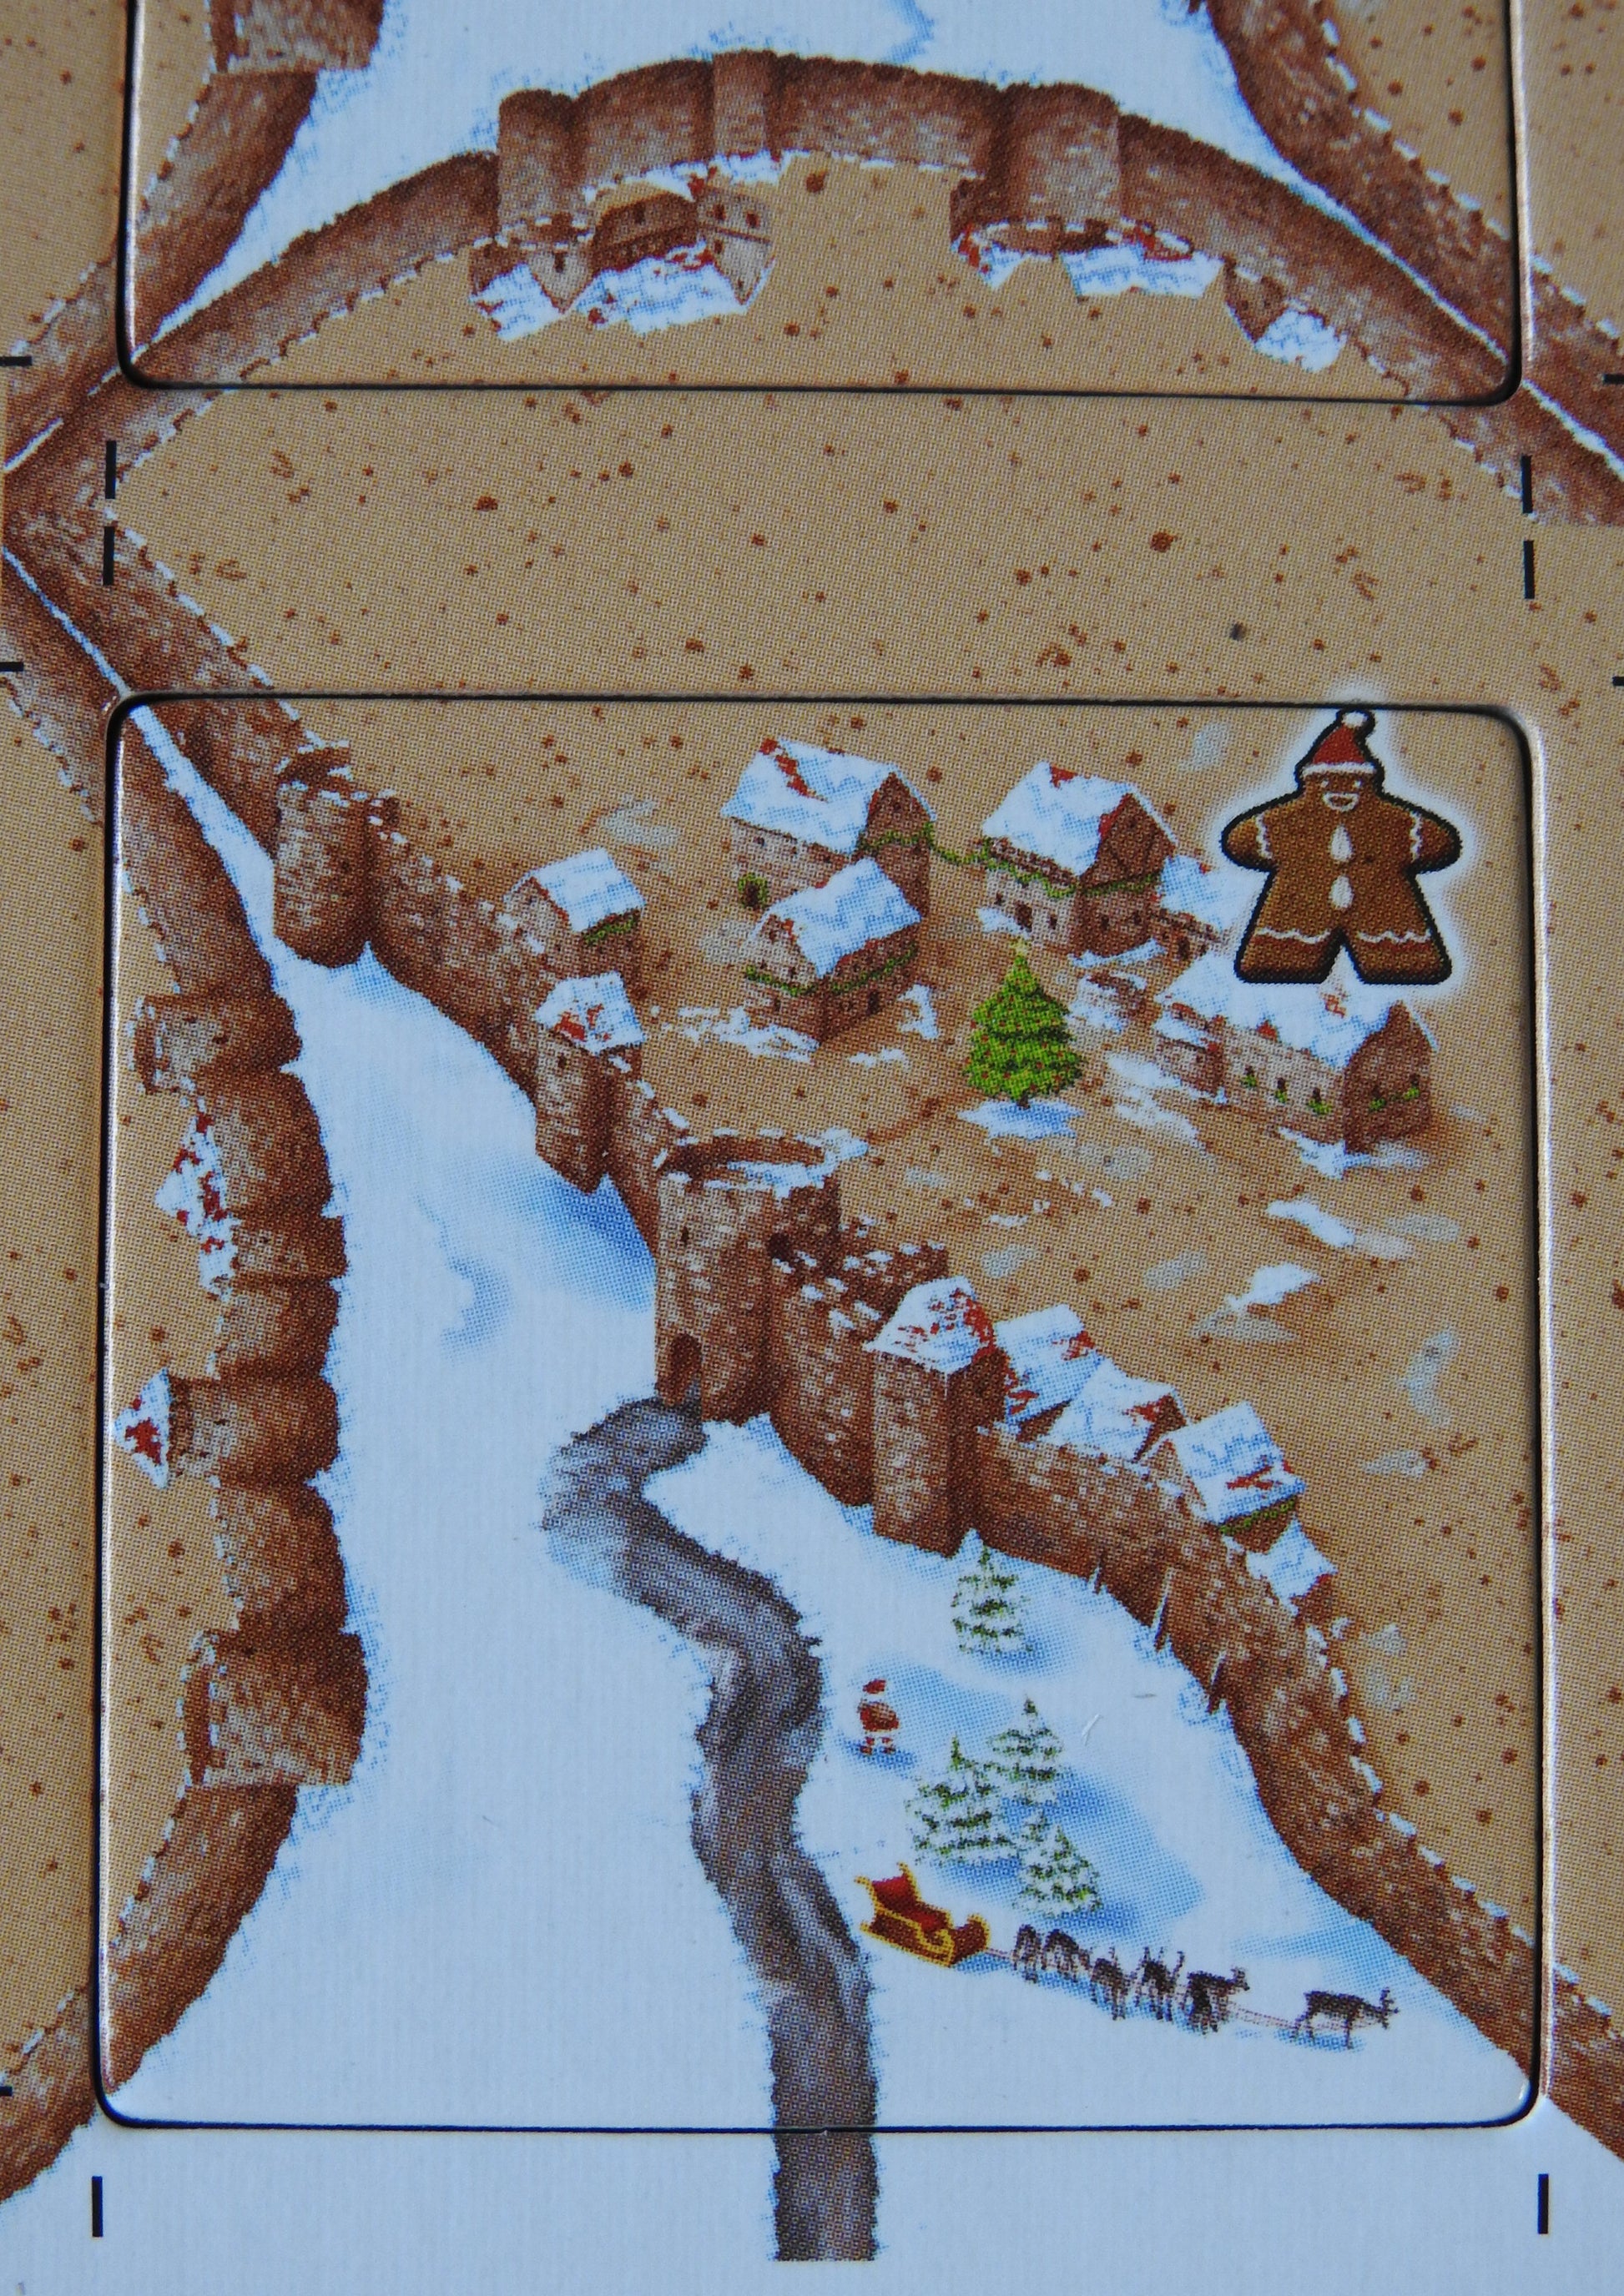 Close-up view of one of the tiles included. Shows a road in a snowy field leading to the city gates.